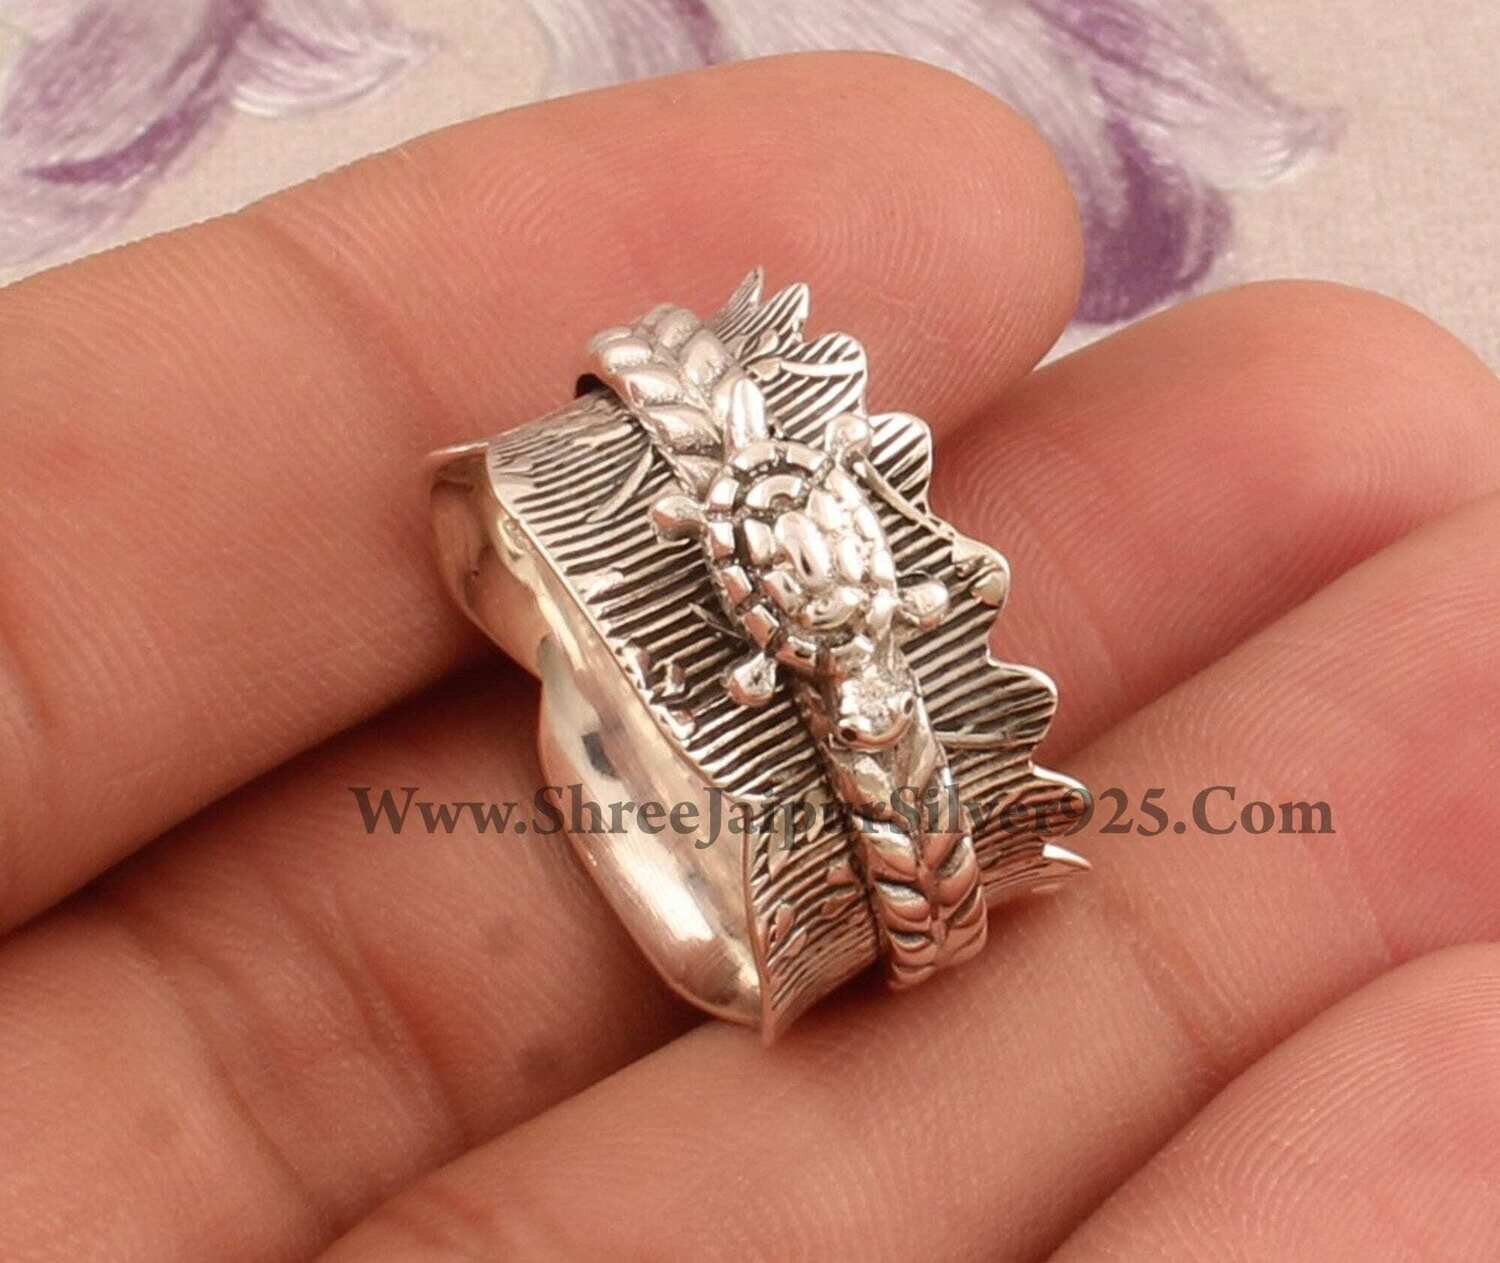 Turtle Spinner Ring, 925 Sterling Solid Silver Meditation Ring, Antiqued Silver Spinner Ring, Carved Wave Band Ring, Valentine's Day Jewelry